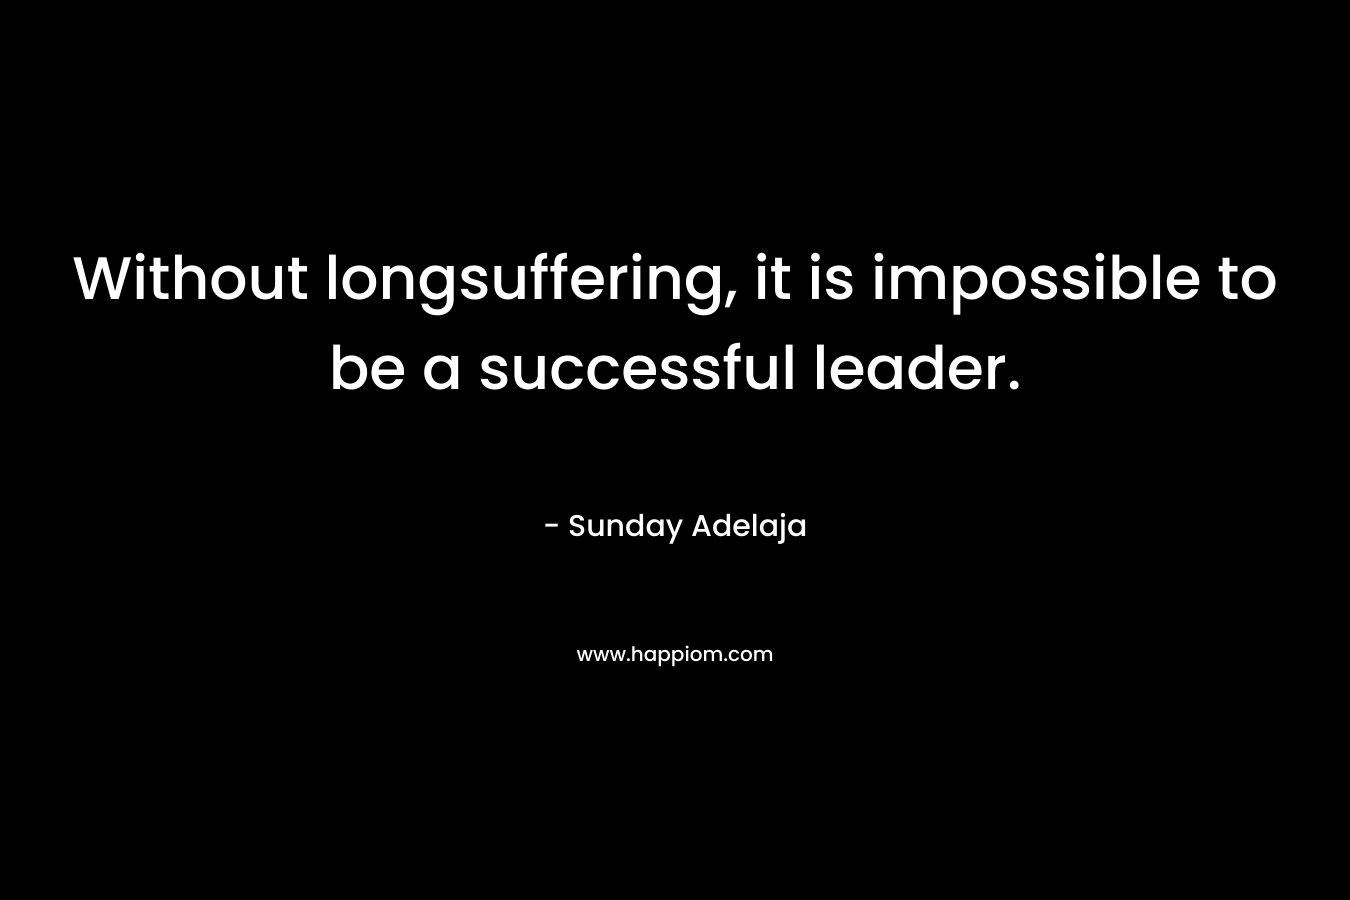 Without longsuffering, it is impossible to be a successful leader.